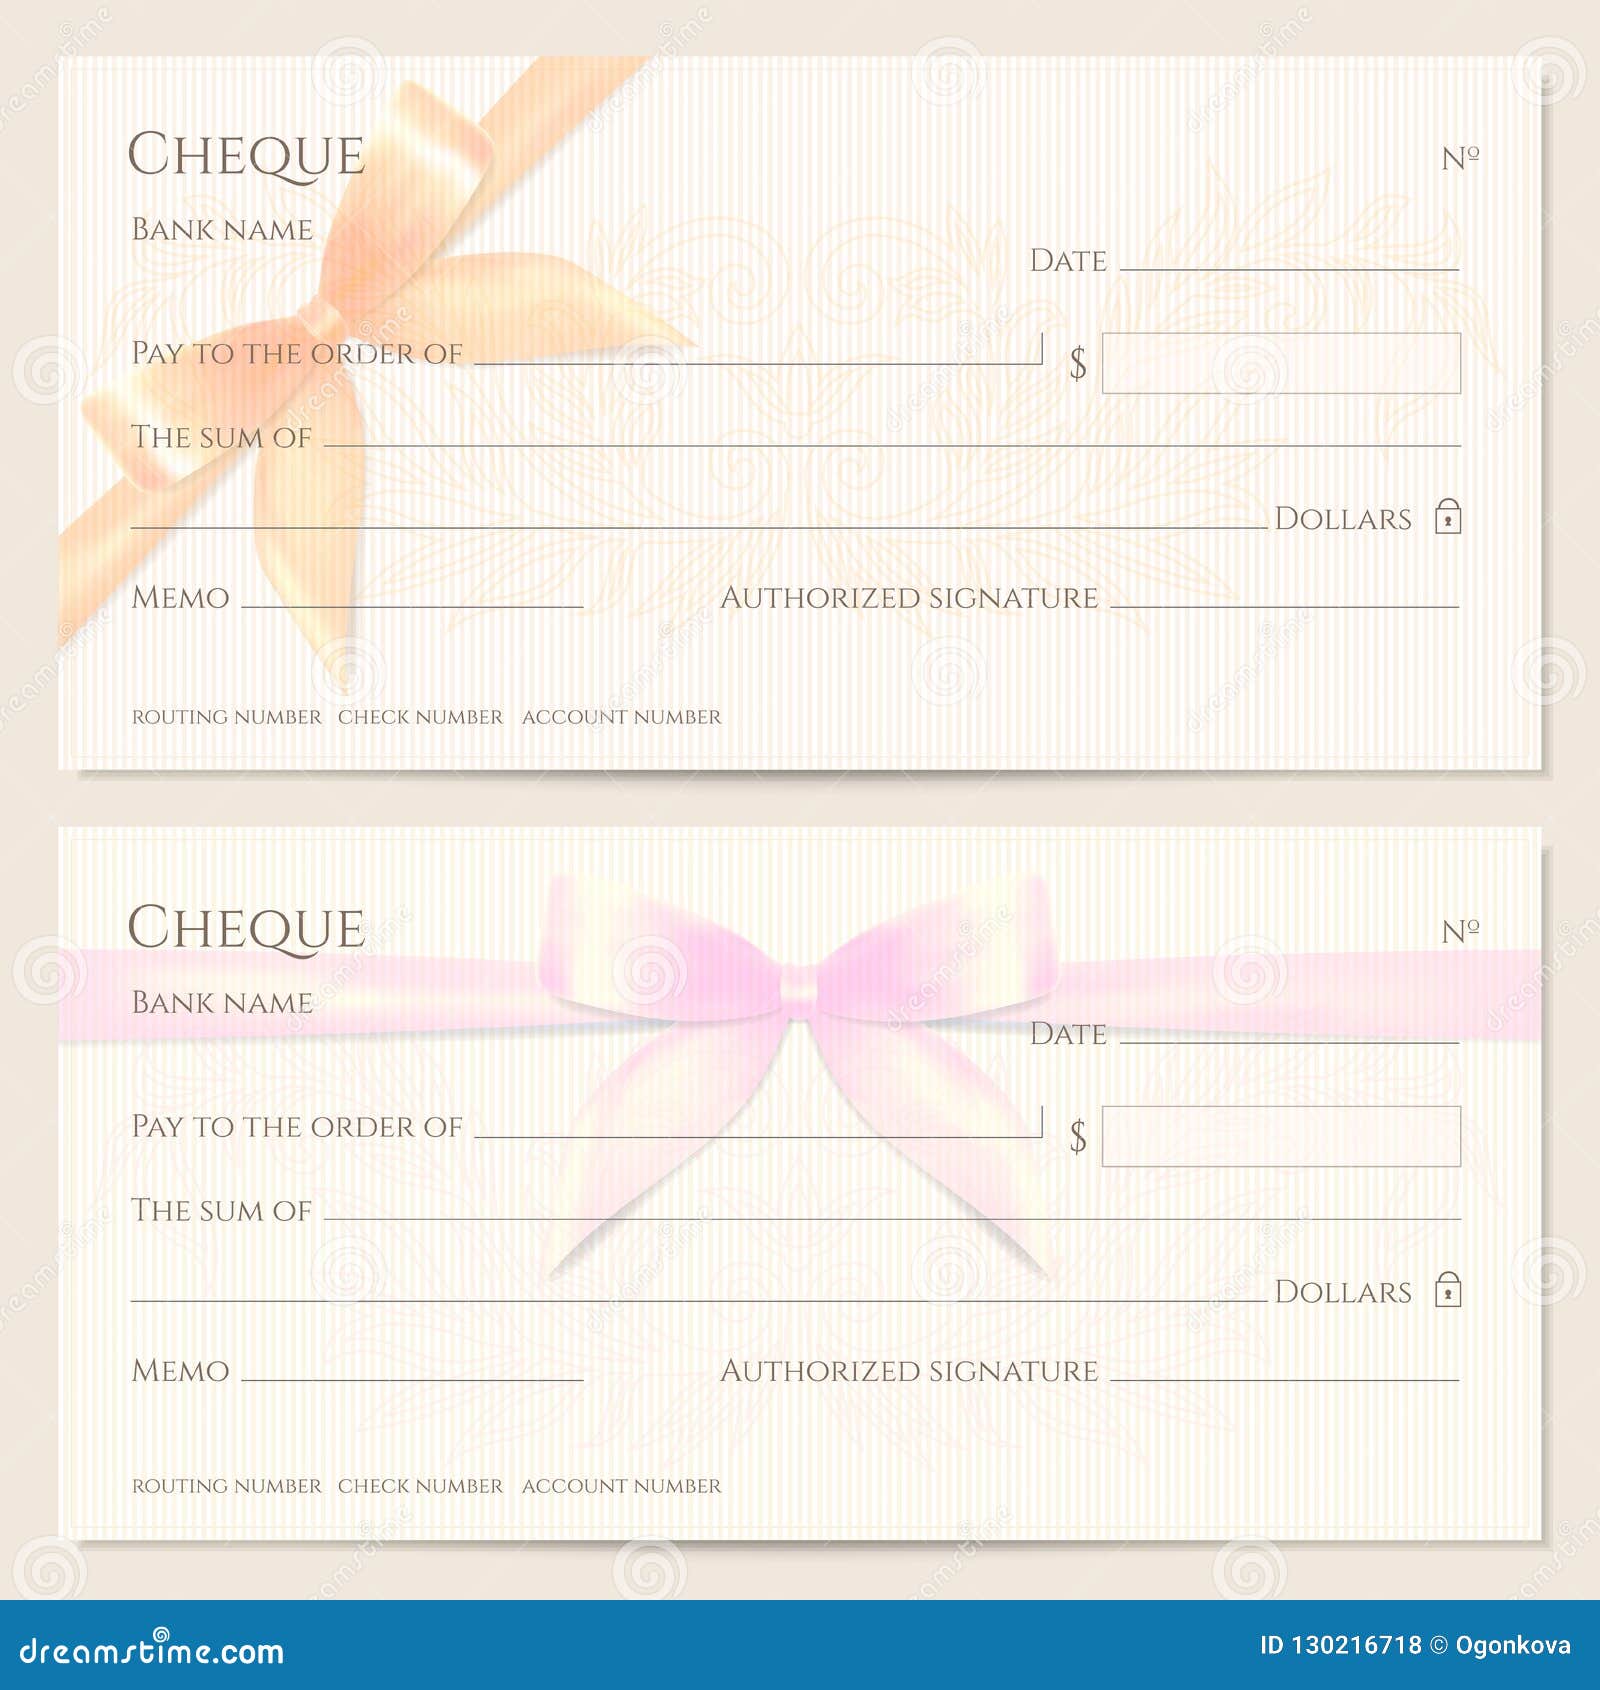 Check, Cheque Chequebook Template. Floral Pattern with Orange, Pink Bow ...